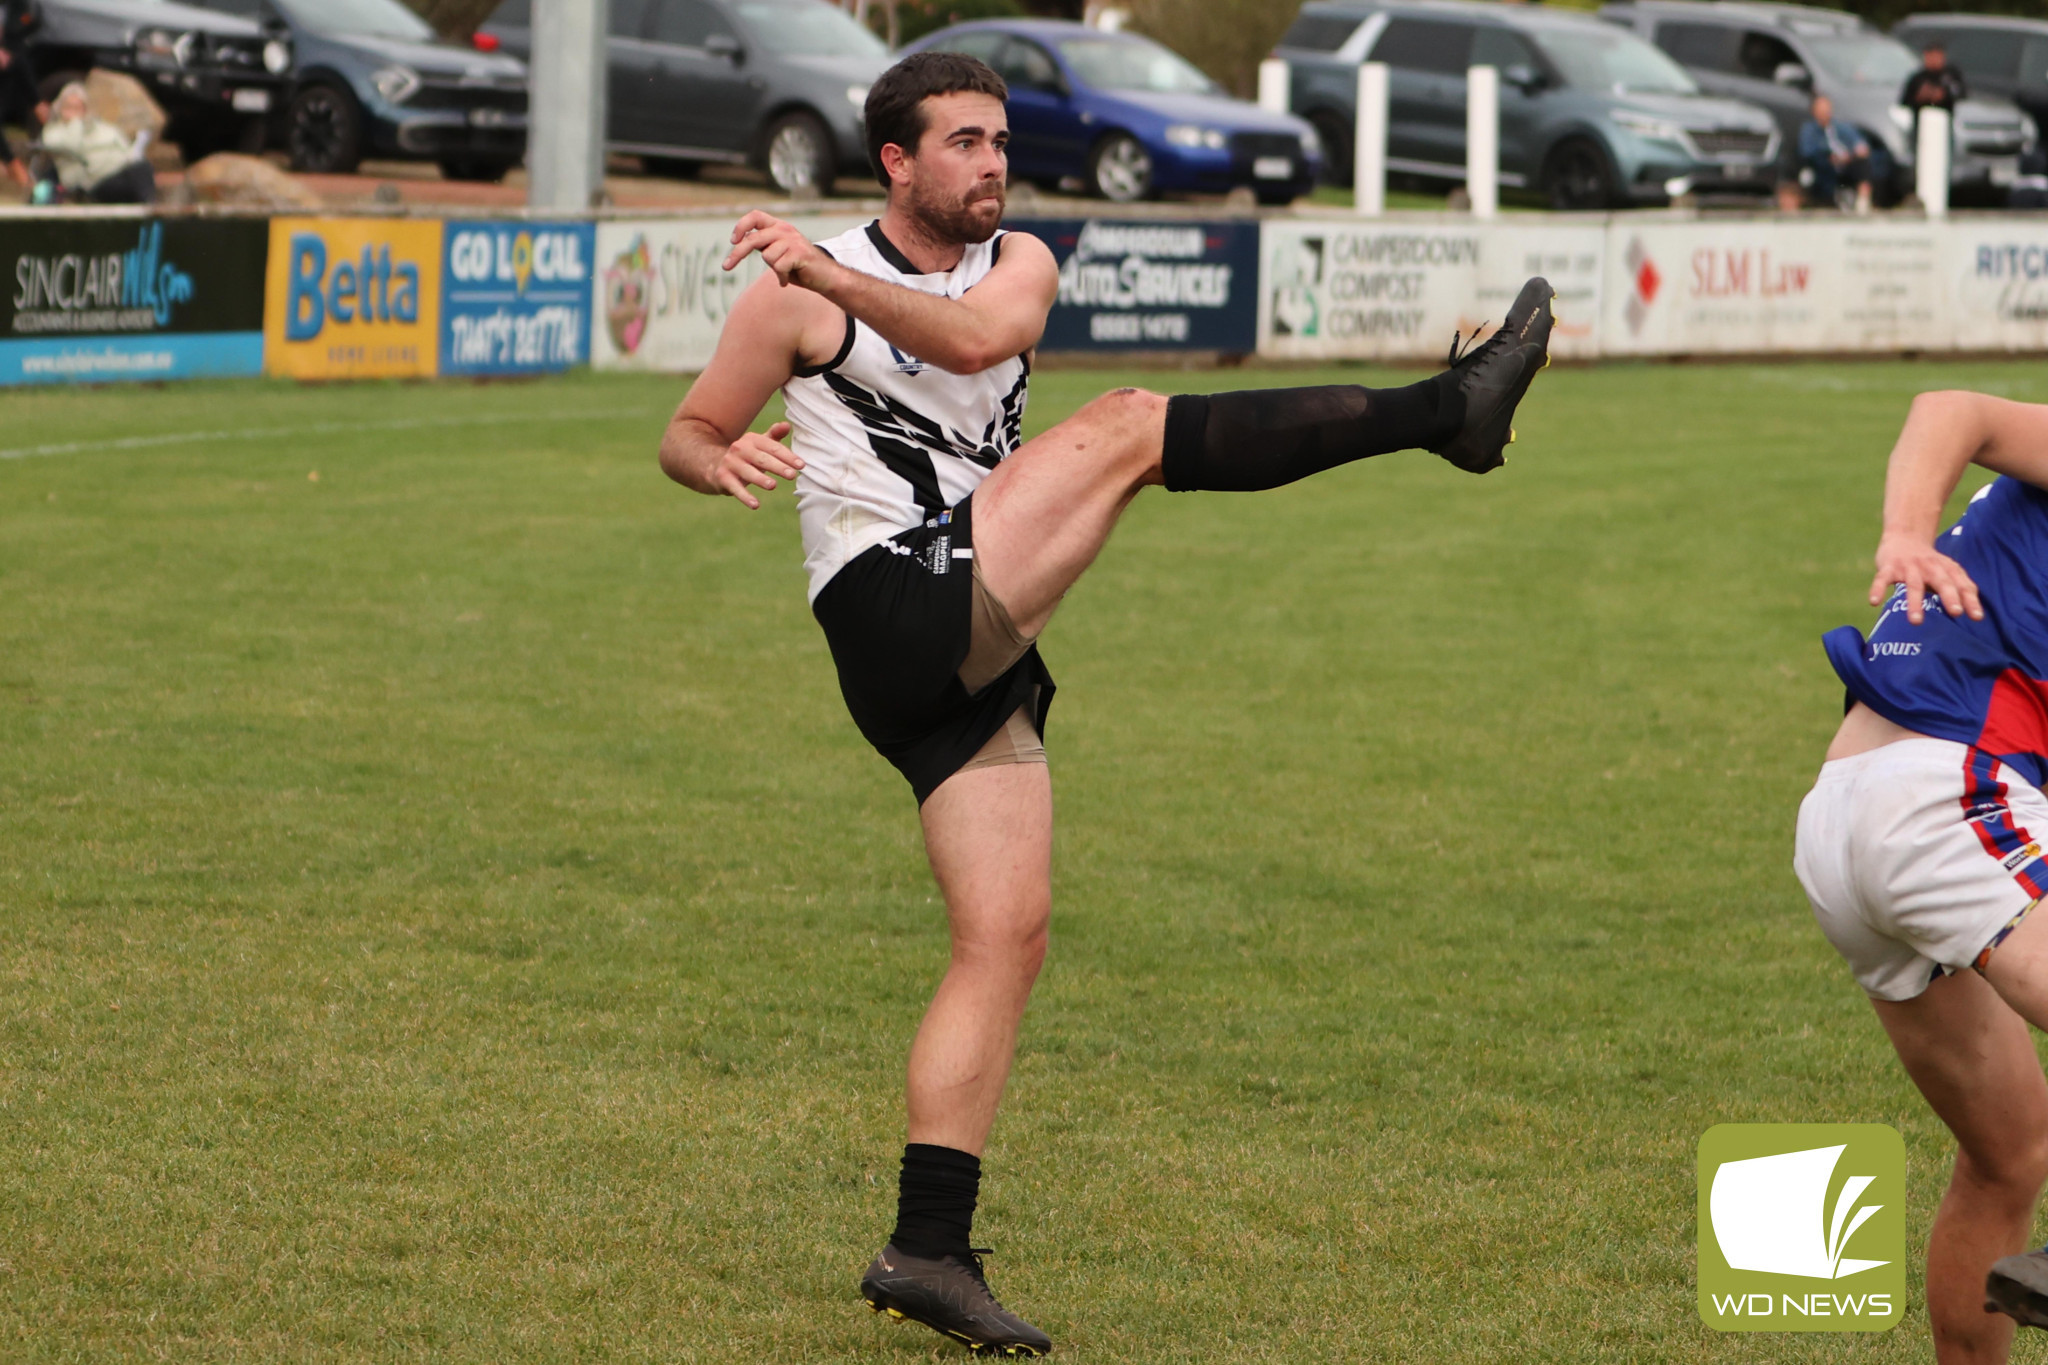 Will Rowbottom will play his 100th senior game for the Magpies tomorrow (Saturday).